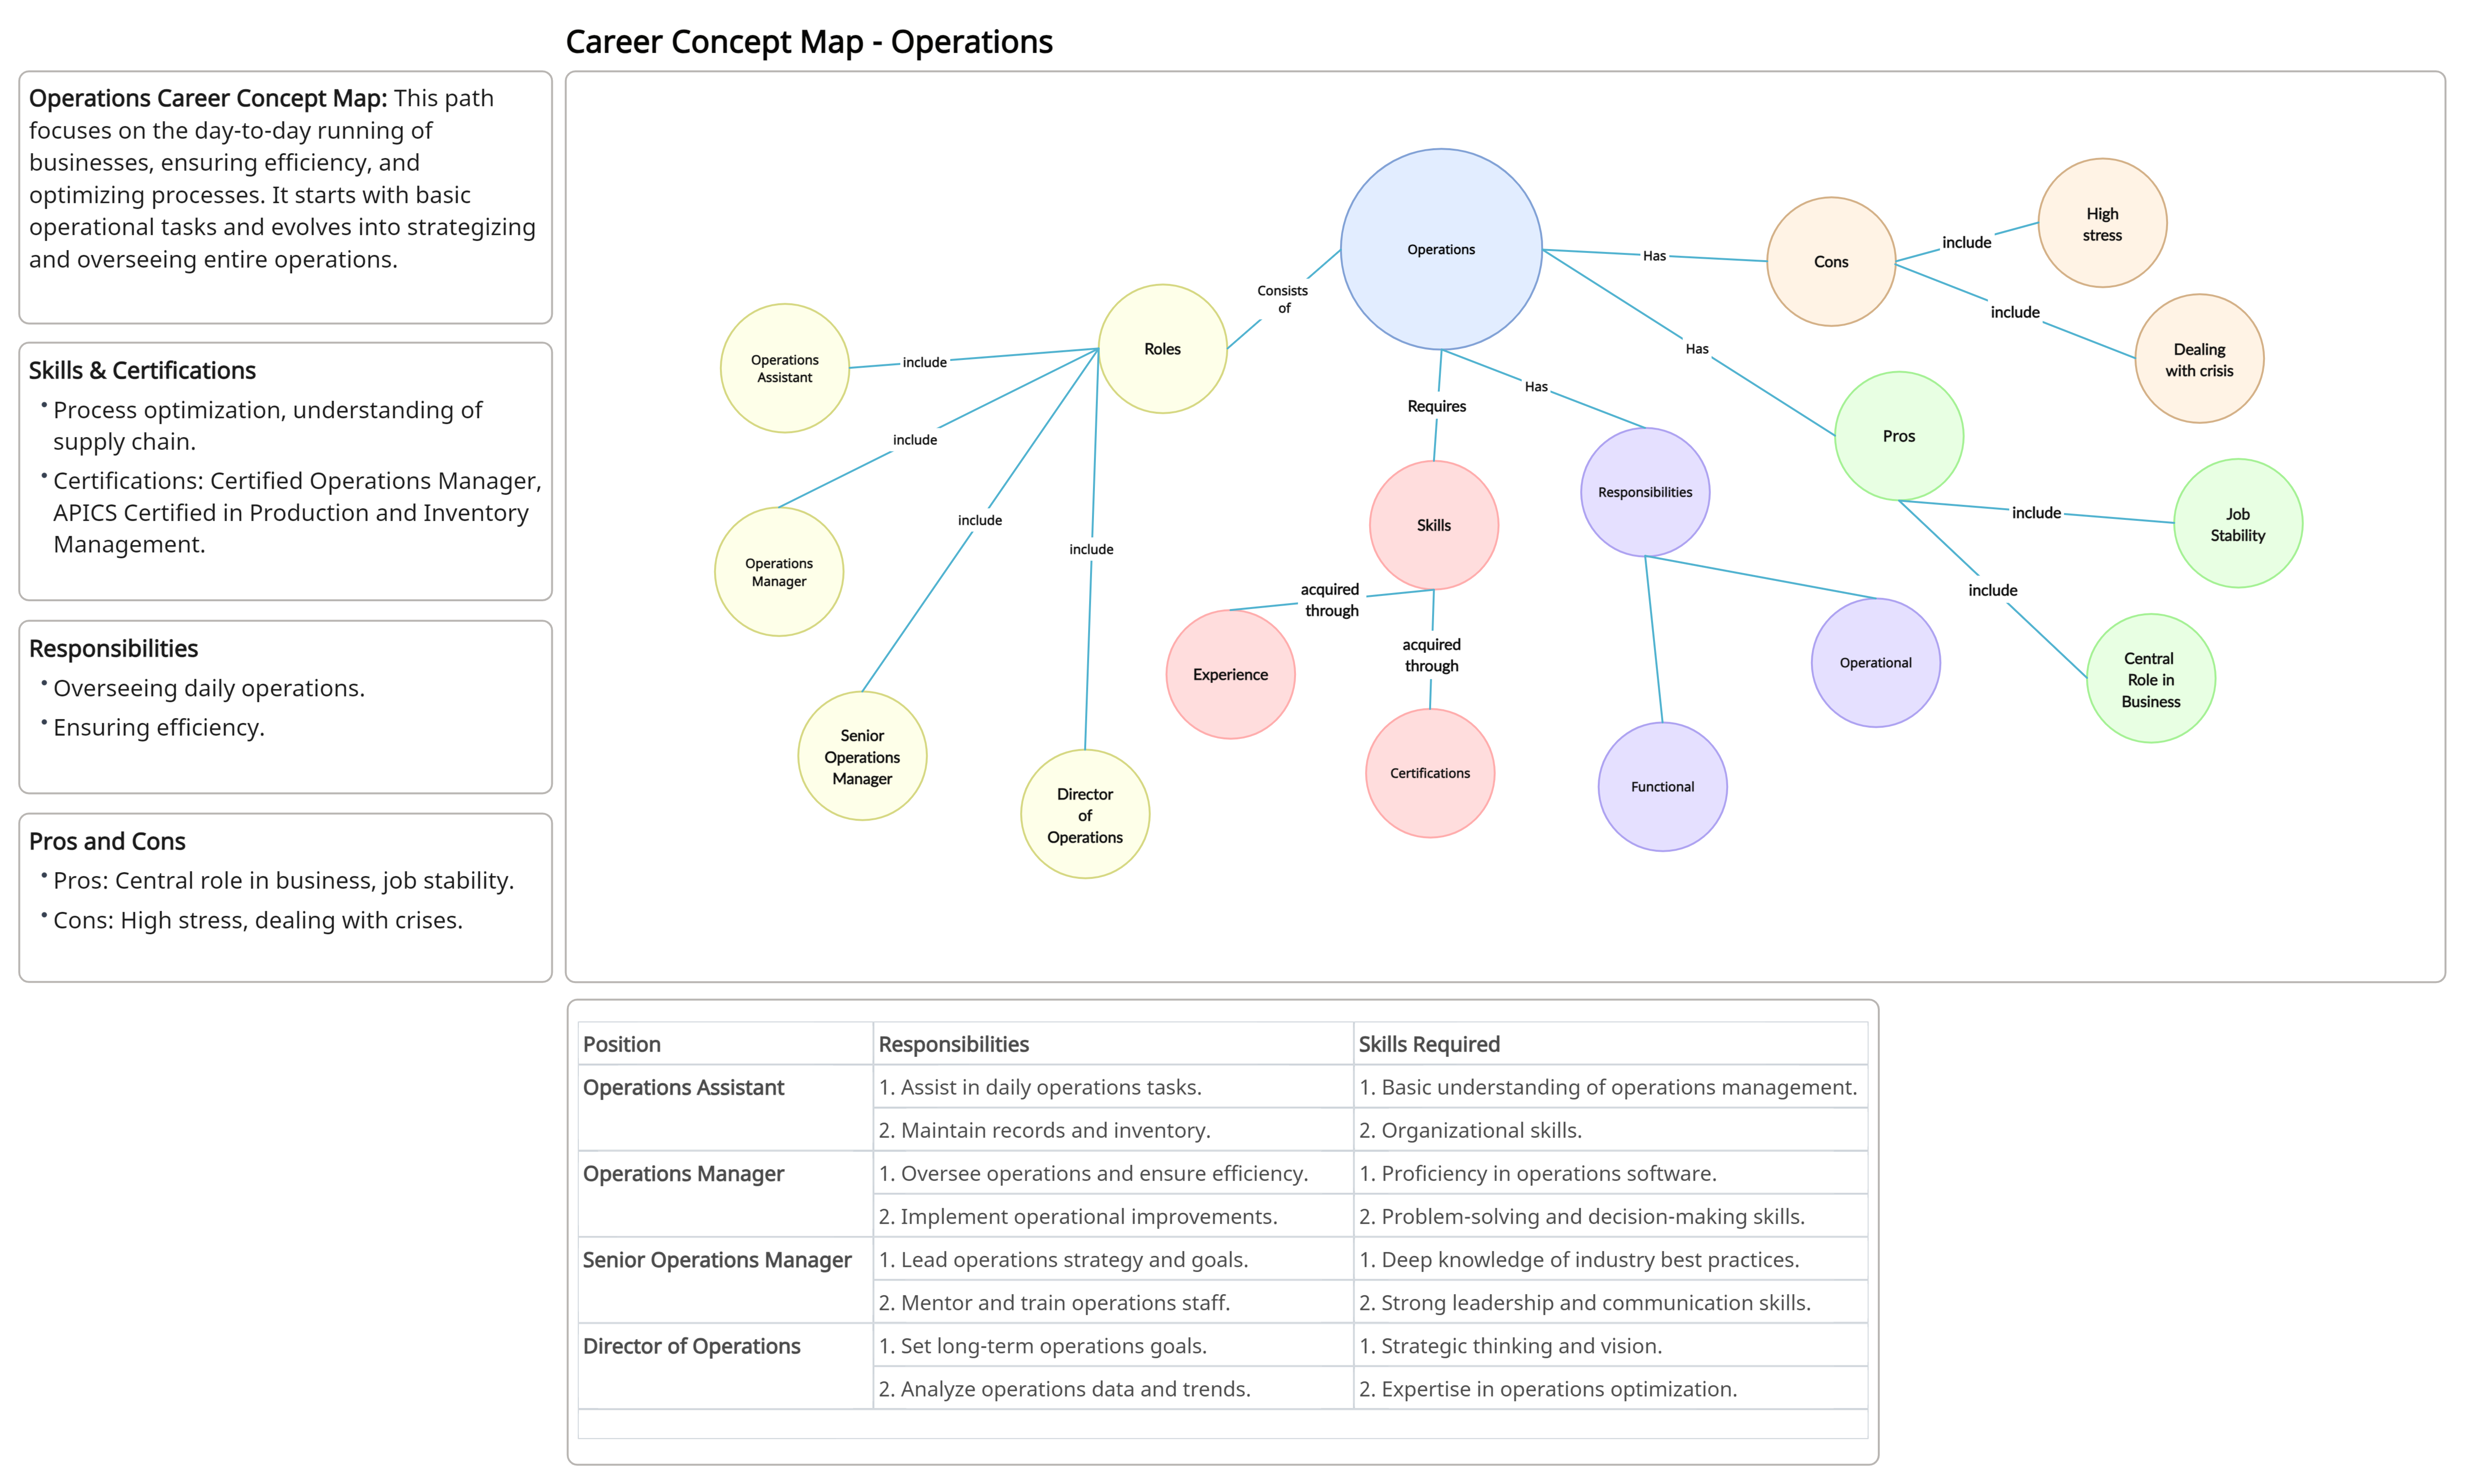 Operations Career Concept Map